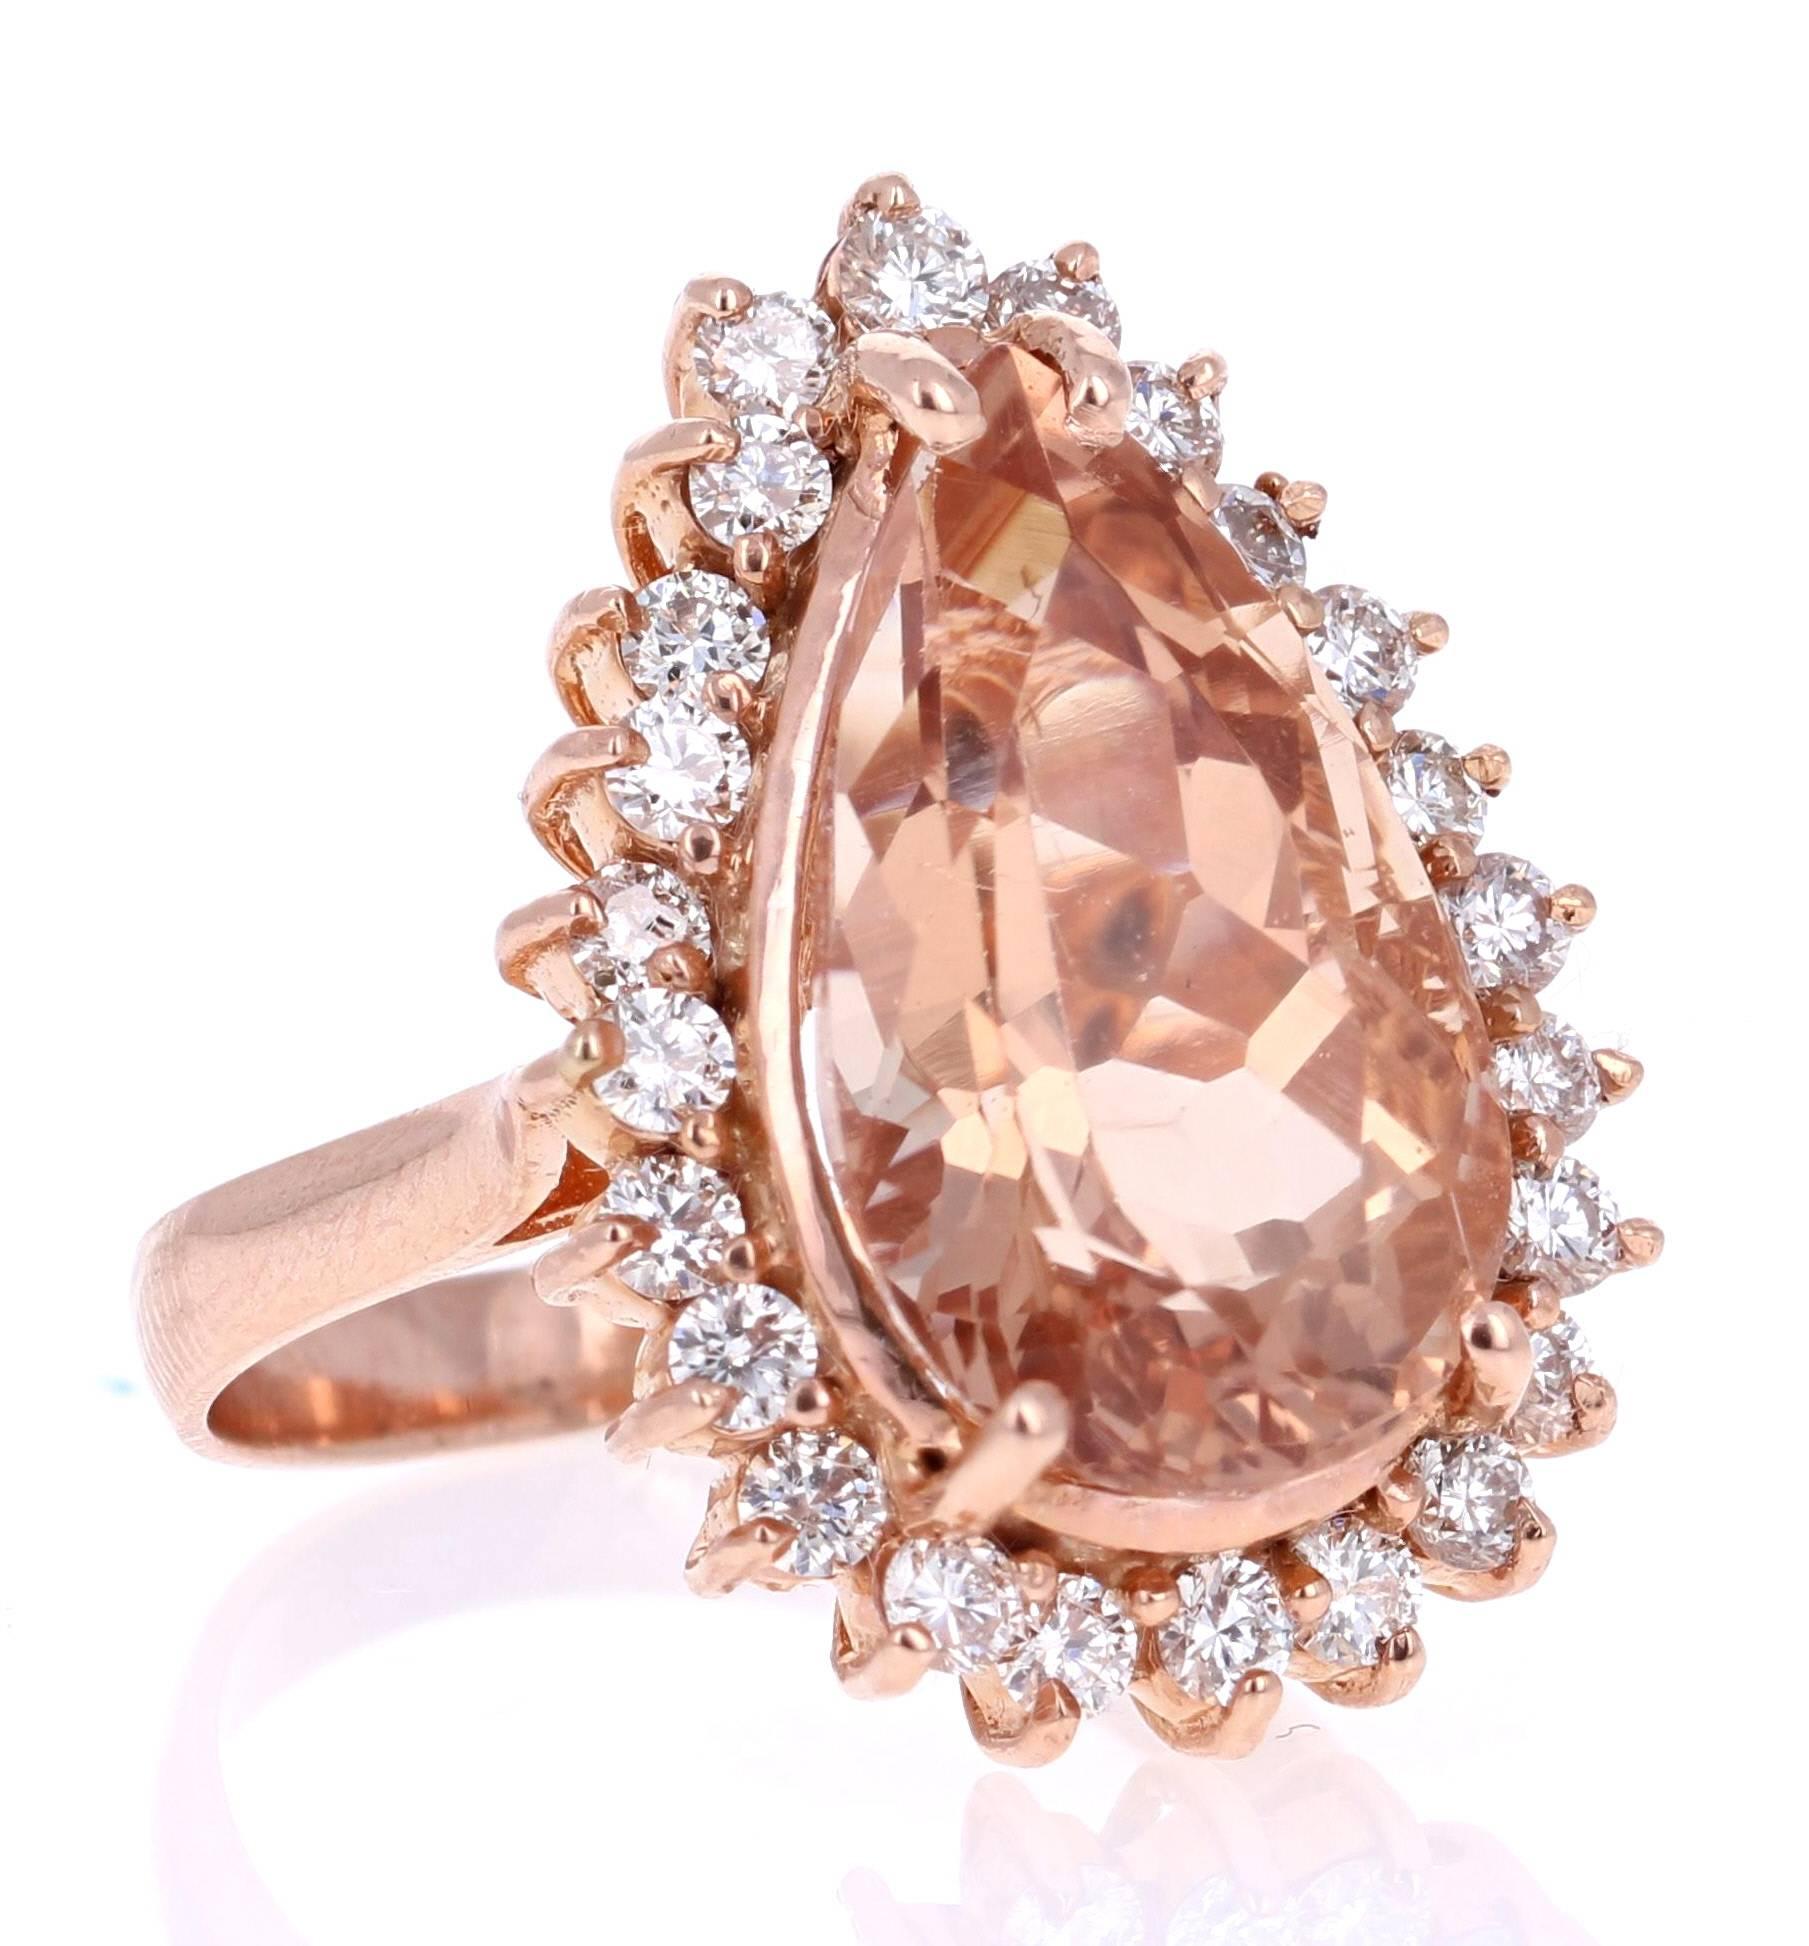 Beautiful and eye-catching 9.15 Carat Pear Cut Morganite Diamond Rose Gold Cocktail Ring!

This ring has a large 8.17 carat Pear Cut Morganite in the center of the ring and is surrounded by 24 Round Cut Diamonds that weigh 0.98 carats.   The total